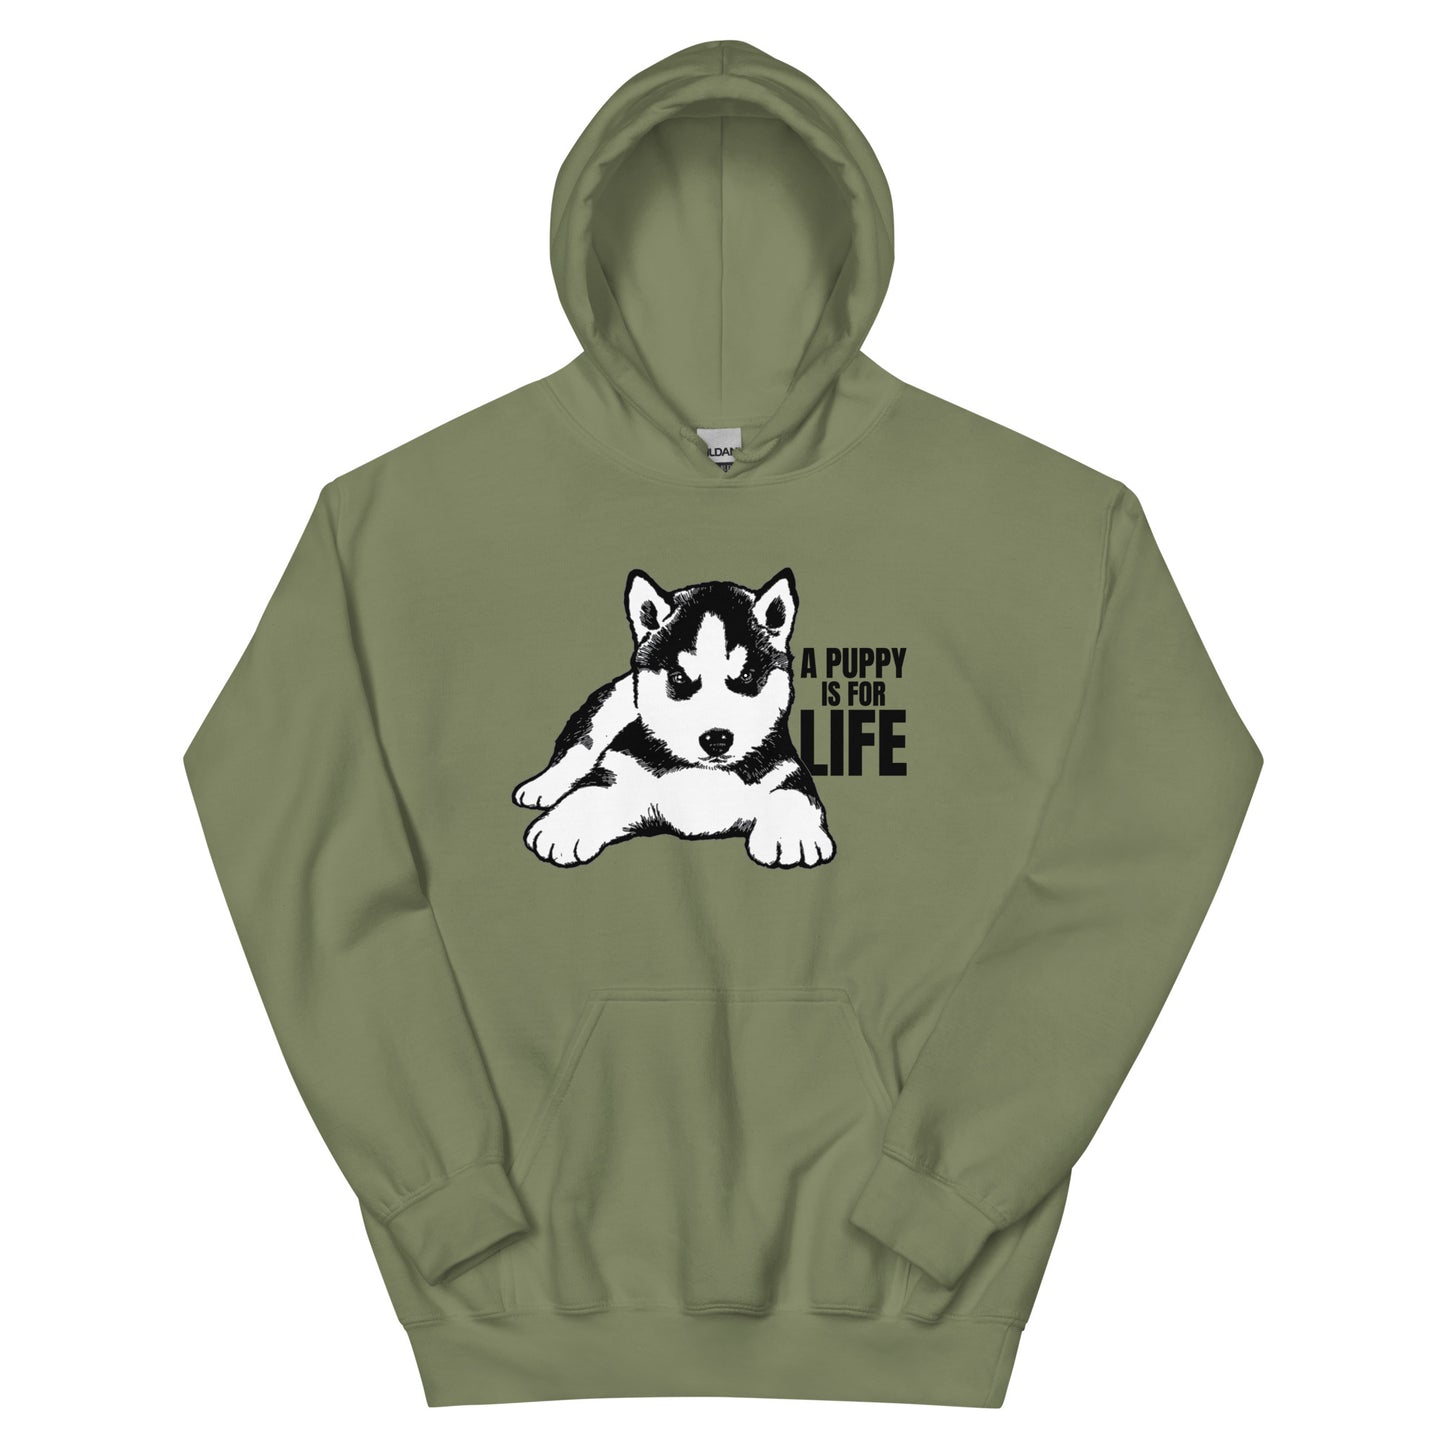 A Puppy Is For Life - Husky - Pullover Hoodie